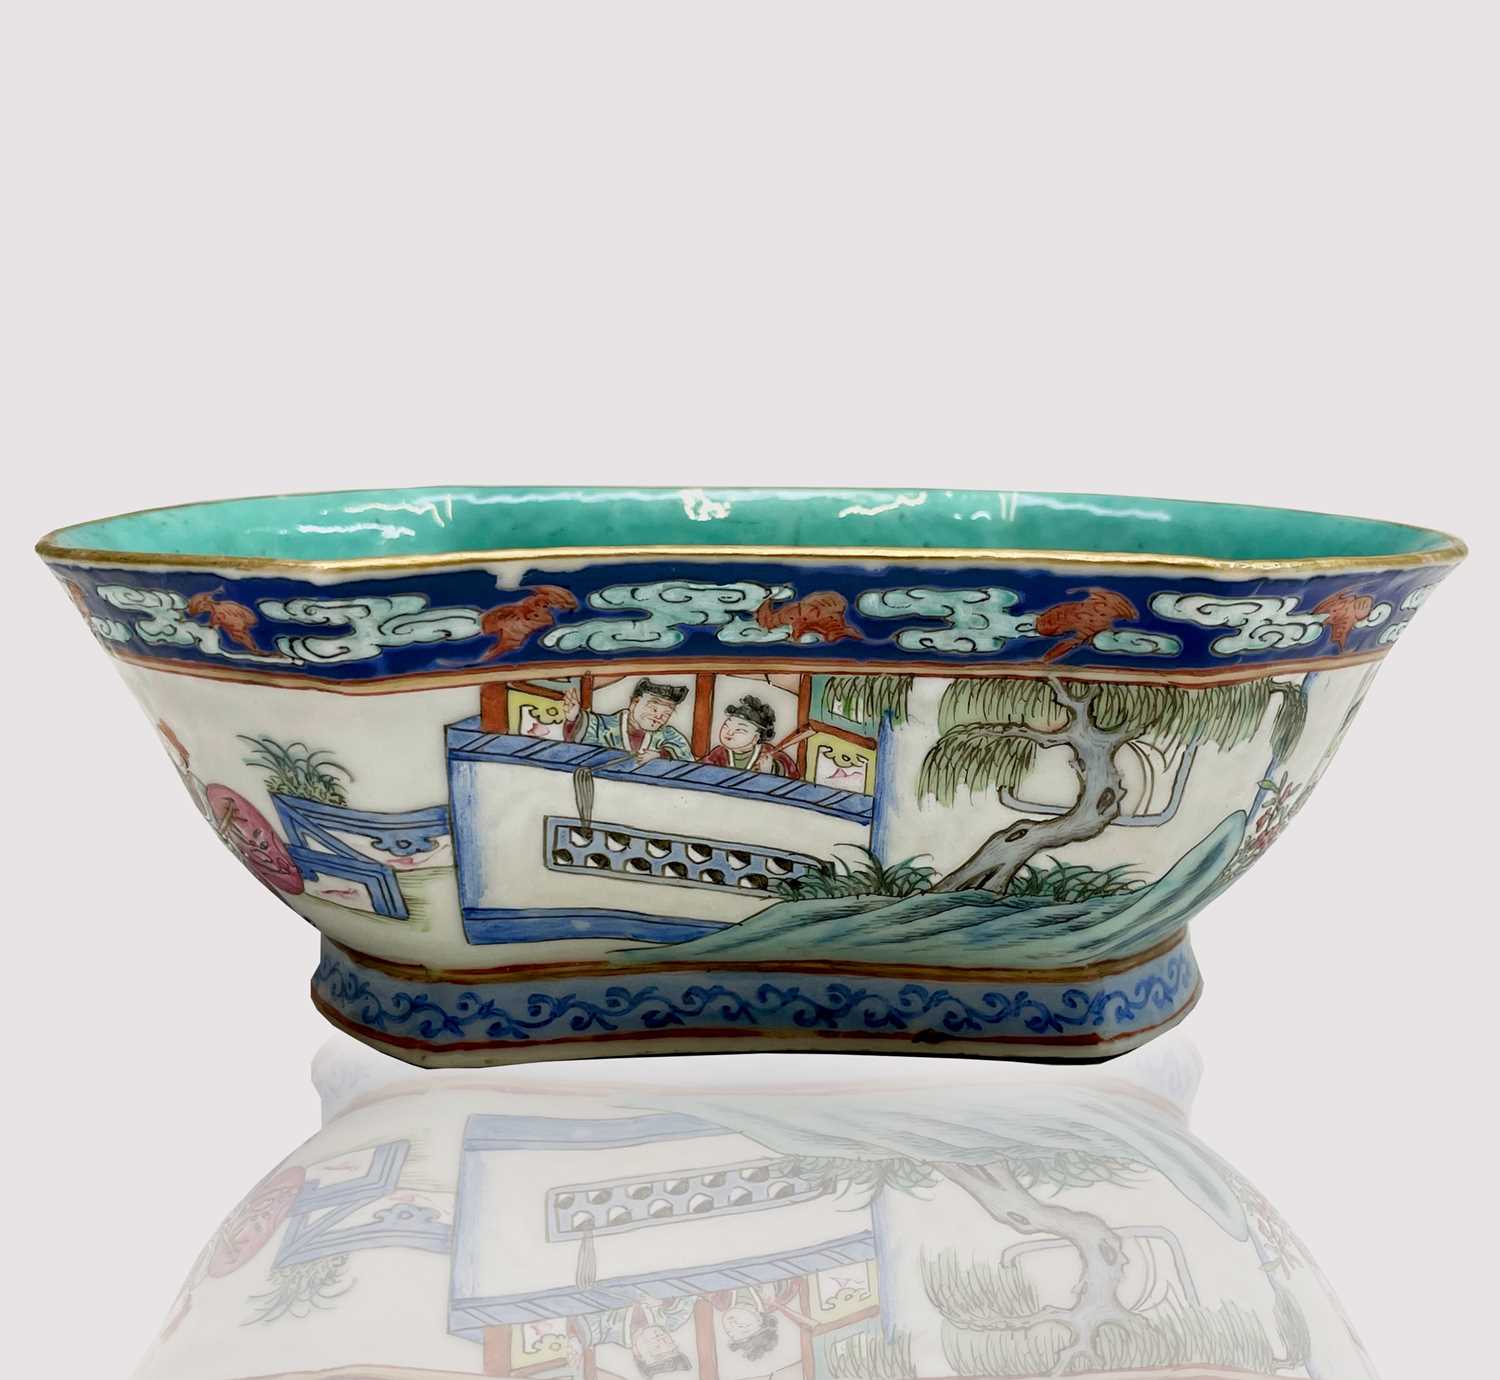 A Chinese famille rose porcelain bowl, 19th century, decorated with warriors in procession and